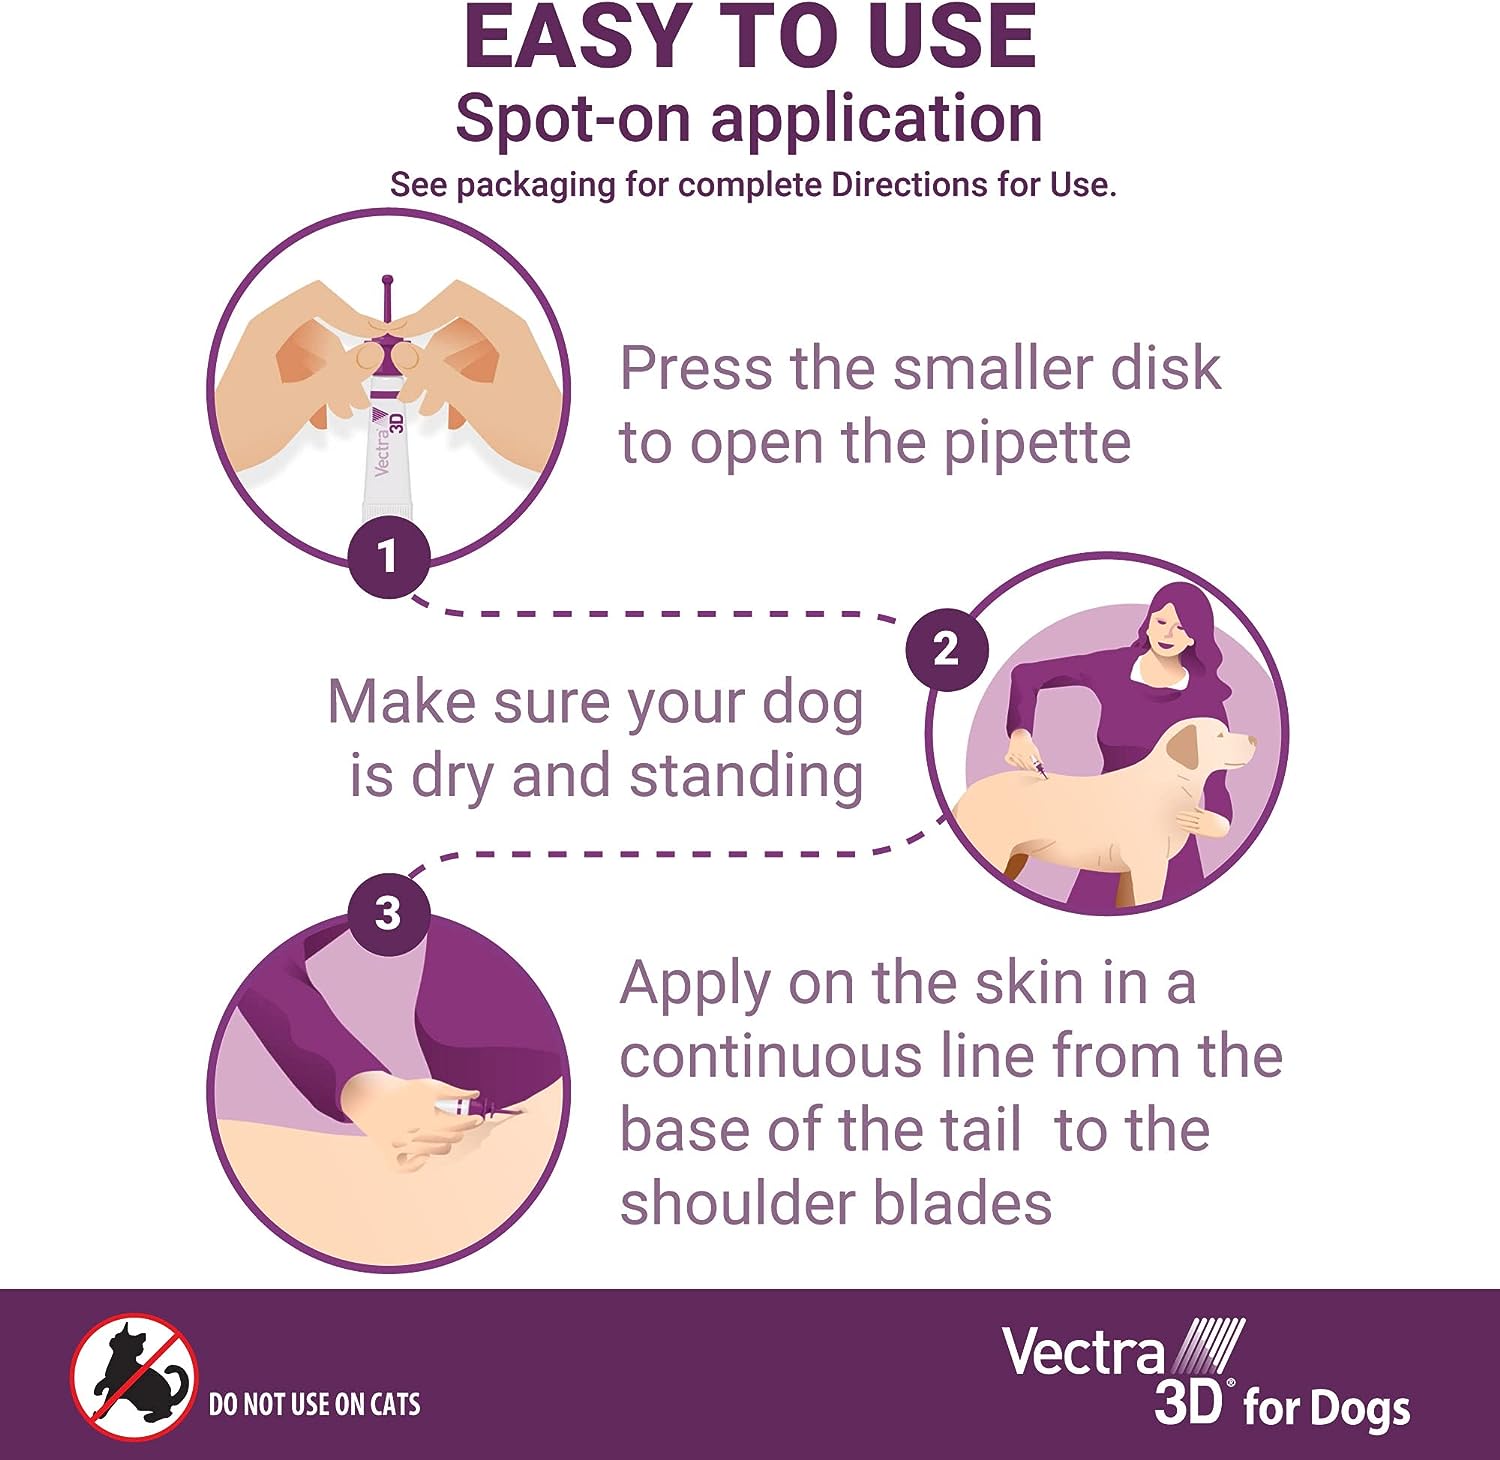 Vectra 3D for Dogs Flea, Tick & Mosquito Treatment & Prevention for Medium Dogs (21 – 55 lbs), 6 Month Supply : Pet Flea Drops : Pet Supplies